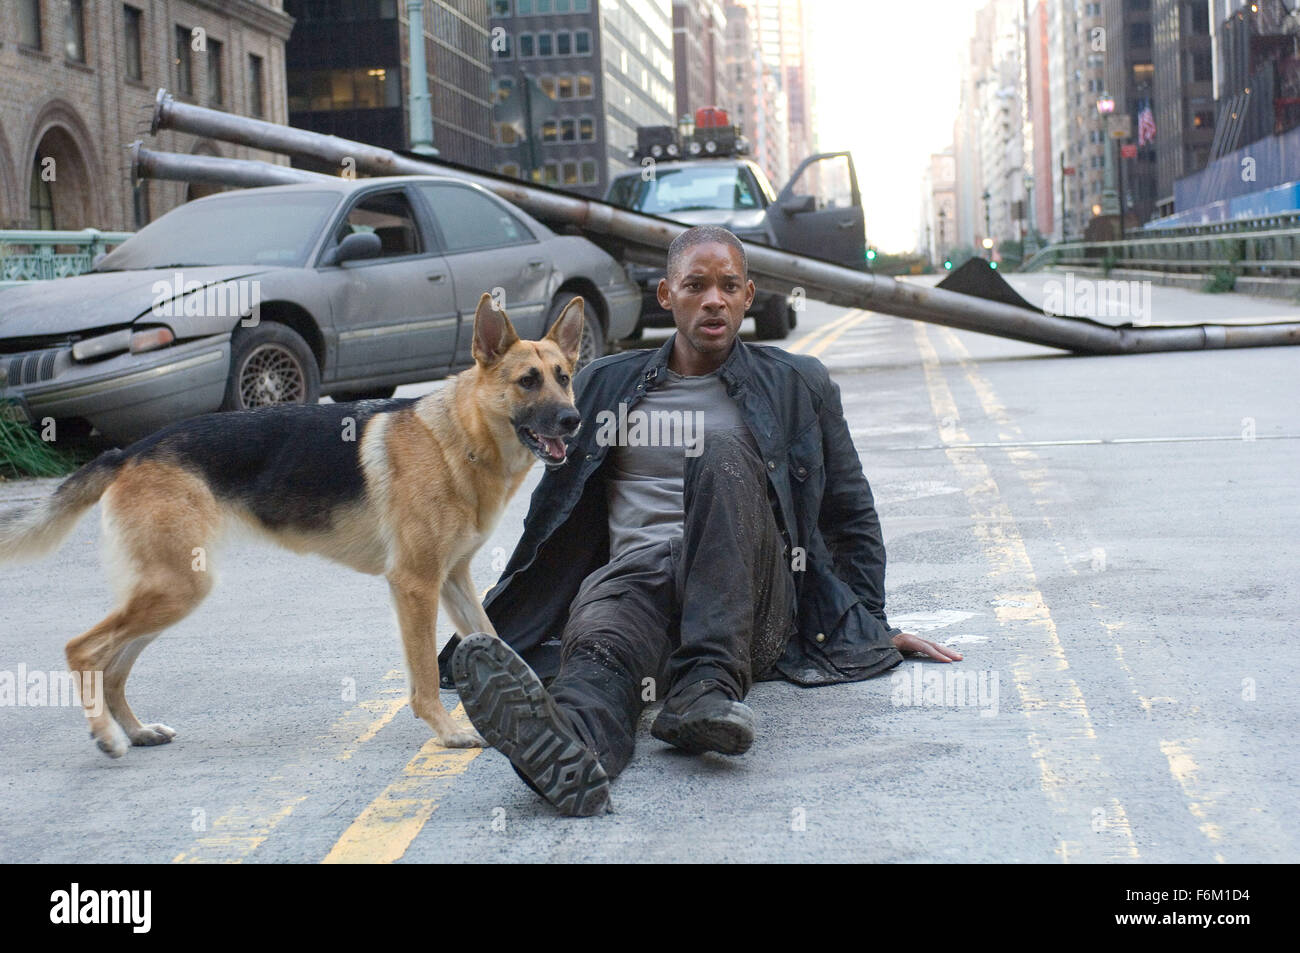 RELEASE DATE: Dec 05, 2007. MOVIE TITLE: I Am Legend. STUDIO: Overbrook Entertainment. PLOT: It is the year 2012. In the ruins of New York city. Robert Neville who is a military scientist who is the lone survivor of a biochemical disease which was supposed to cure cancer 3 years previous. With only blood thirsty zombies as his neighbors and his trusty dog, Samantha, Robert is trying to discover a cure for this disease and to find out any other people who might have also survived. PICTURED: WILL SMITH stars as Robert Neville. Stock Photo